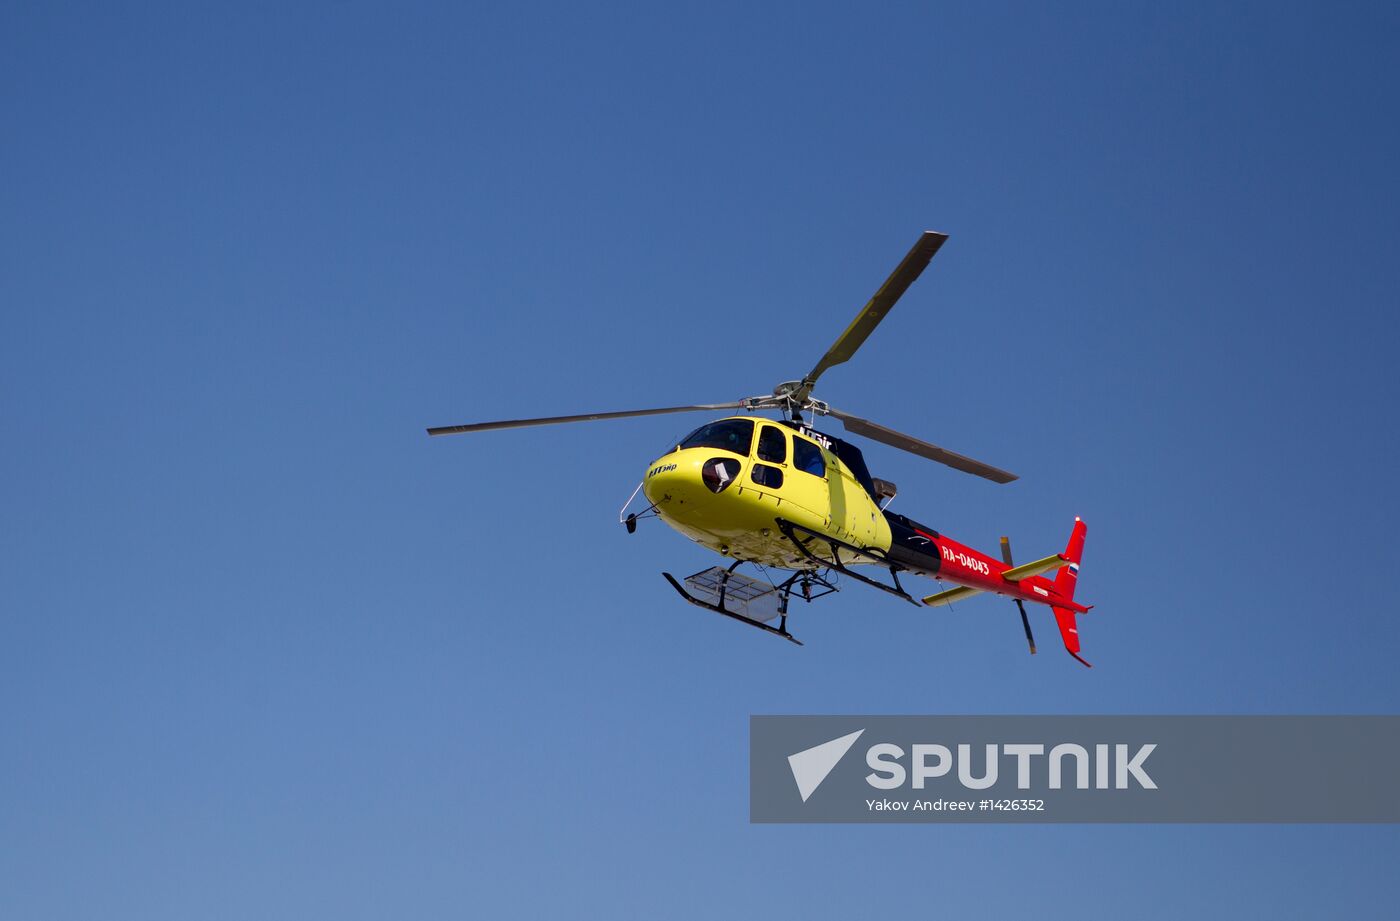 Presentation of AS350 Ecureuil helicopter